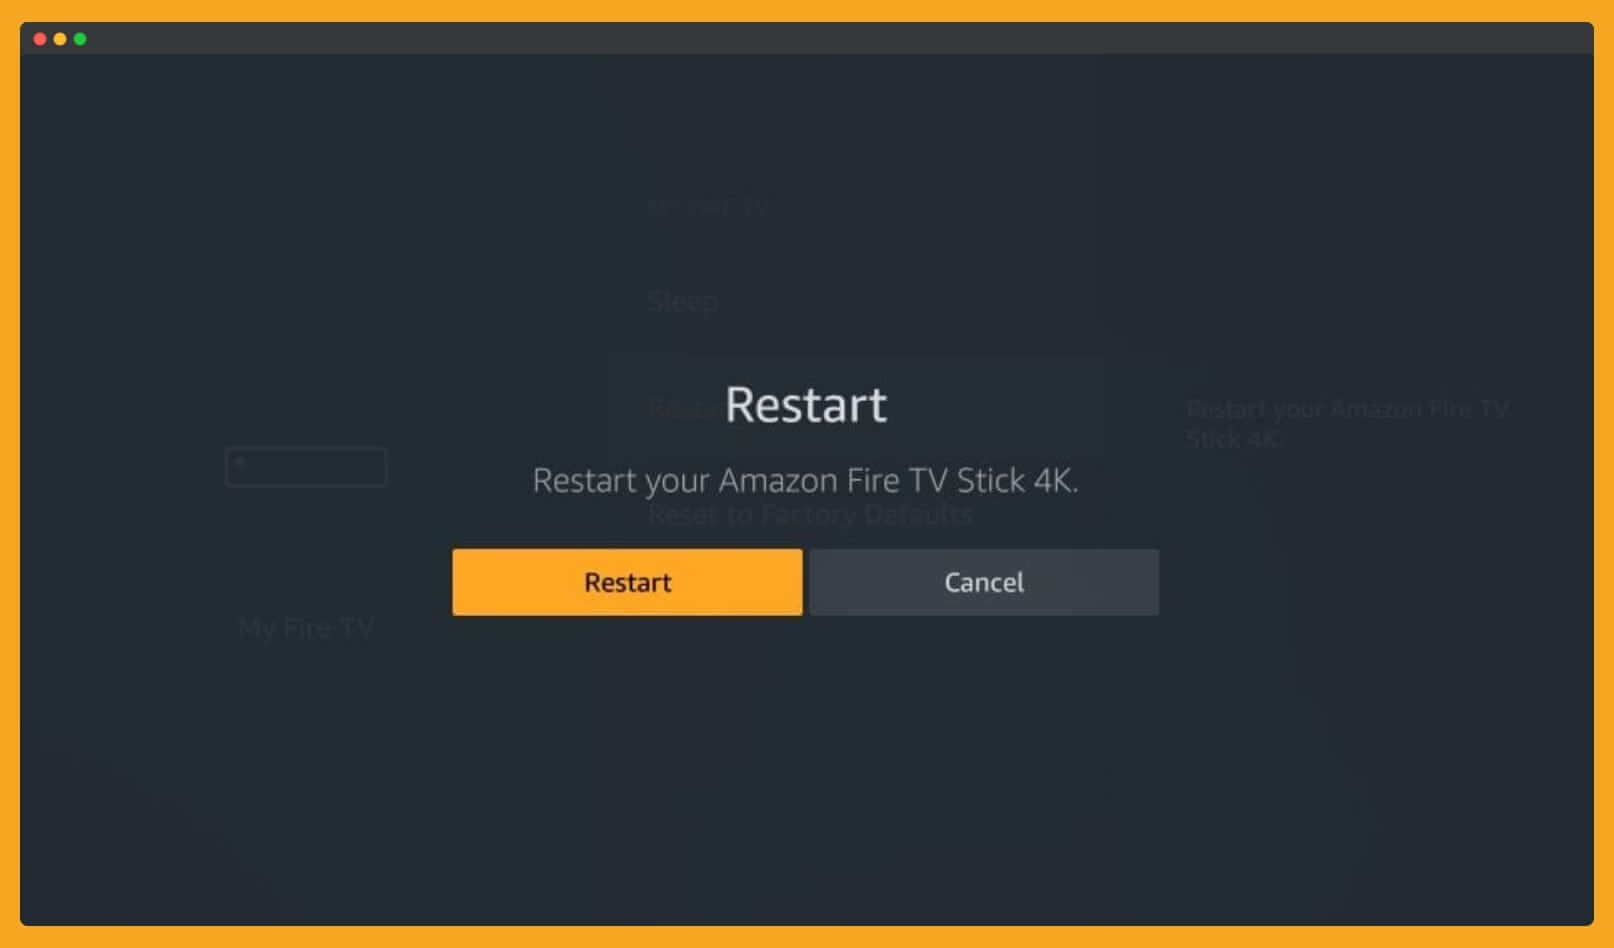 confirmation-just-select-the-Restart